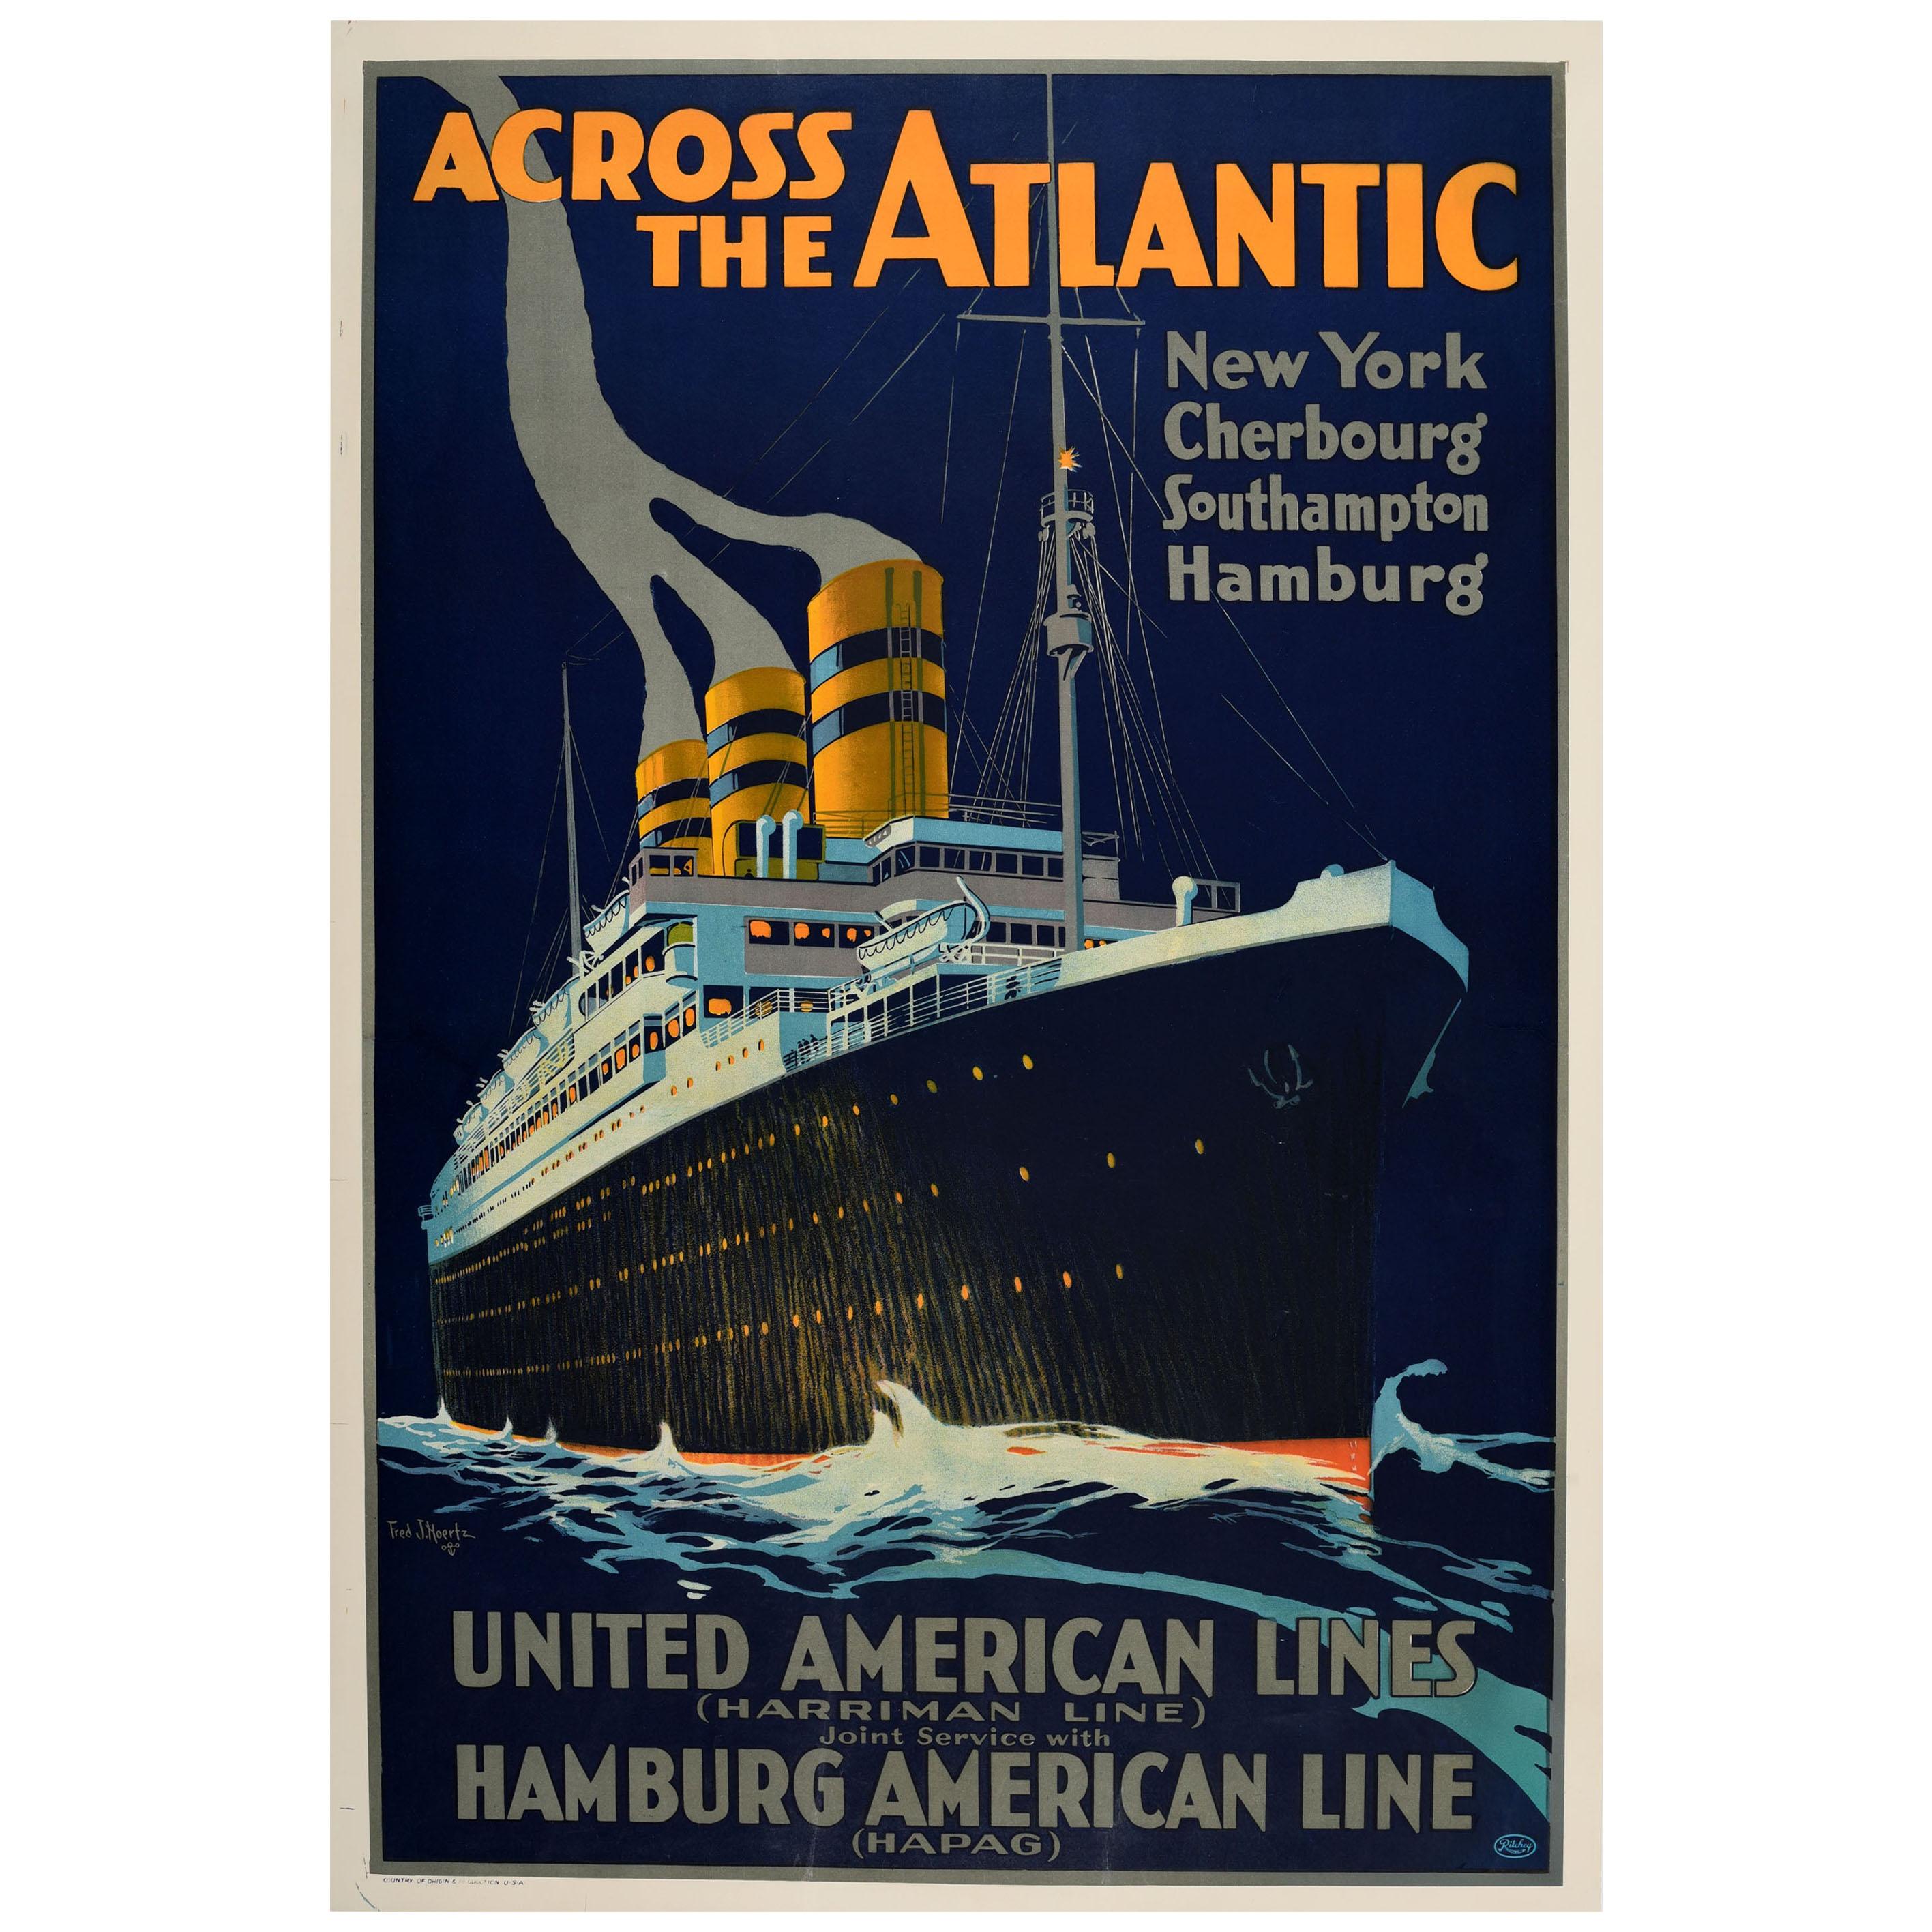 America Export Lines Oceanliner Vintage Cruise Ship Travel Poster Advertisement 